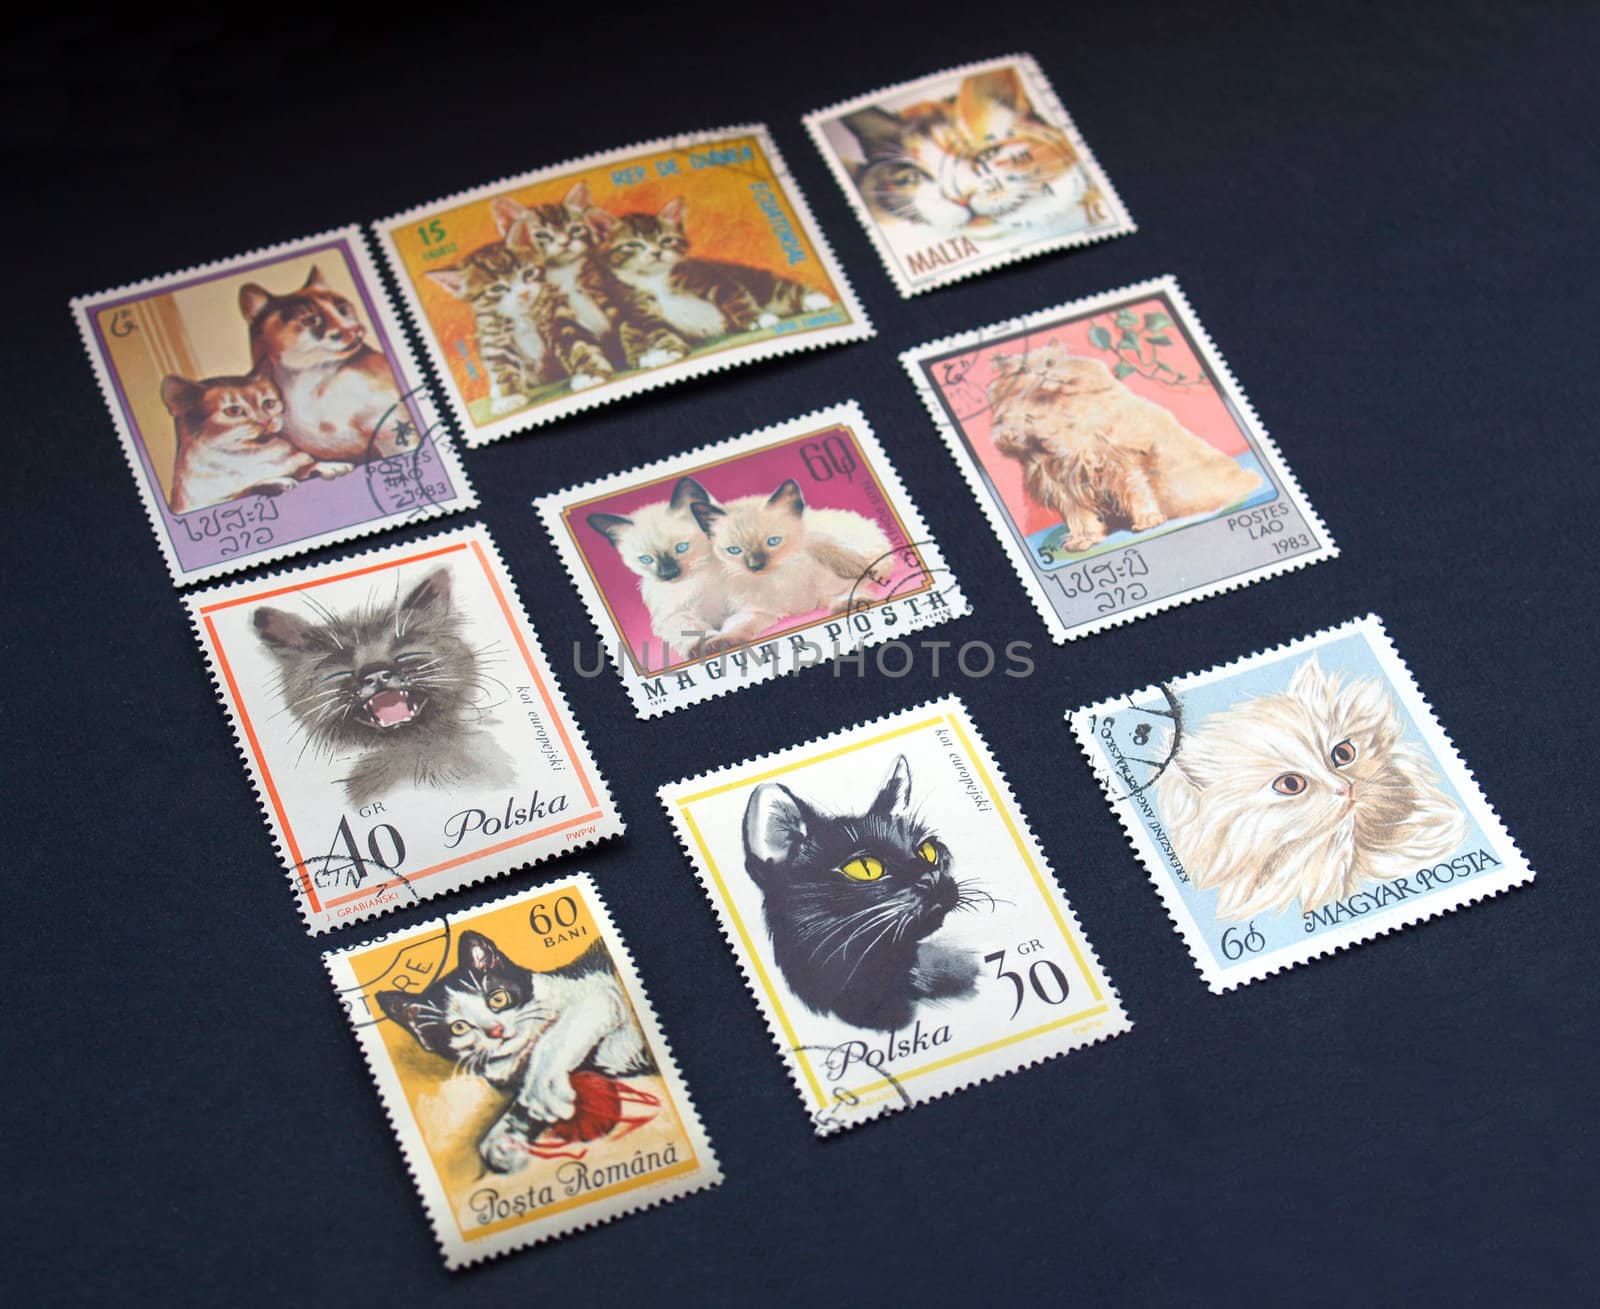 Stamp with cats from Hungary, Malta, Poland, Romania